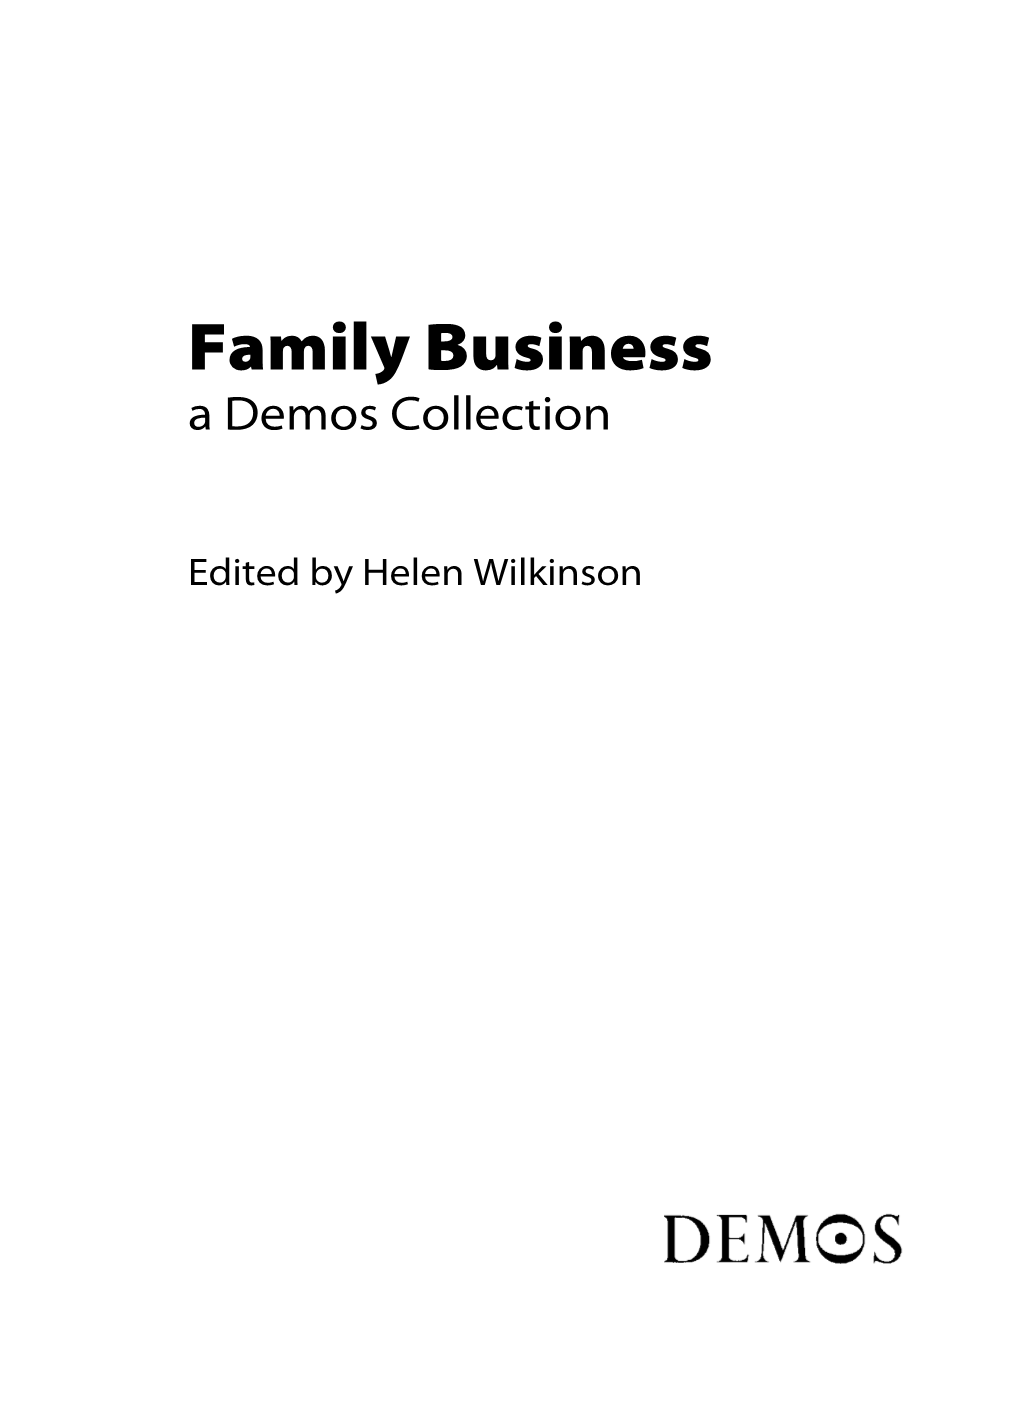 Family Business a Demos Collection